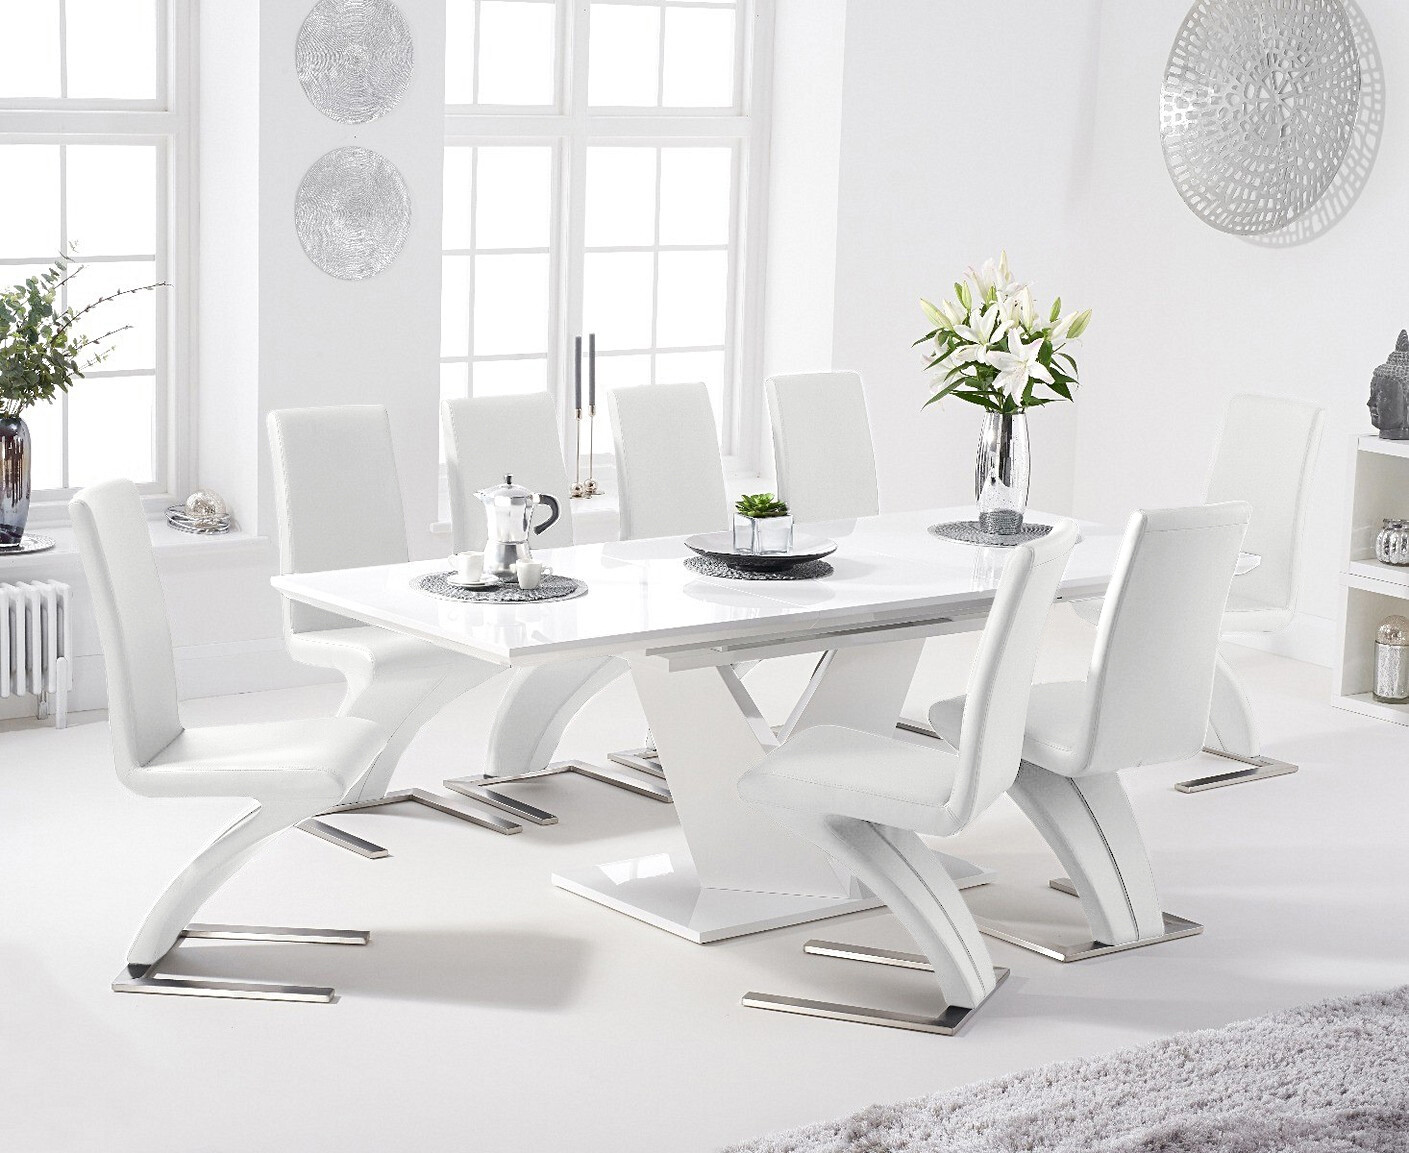 Photo 3 of Extending vittorio 160cm white high gloss dining table with 6 black aldo chairs